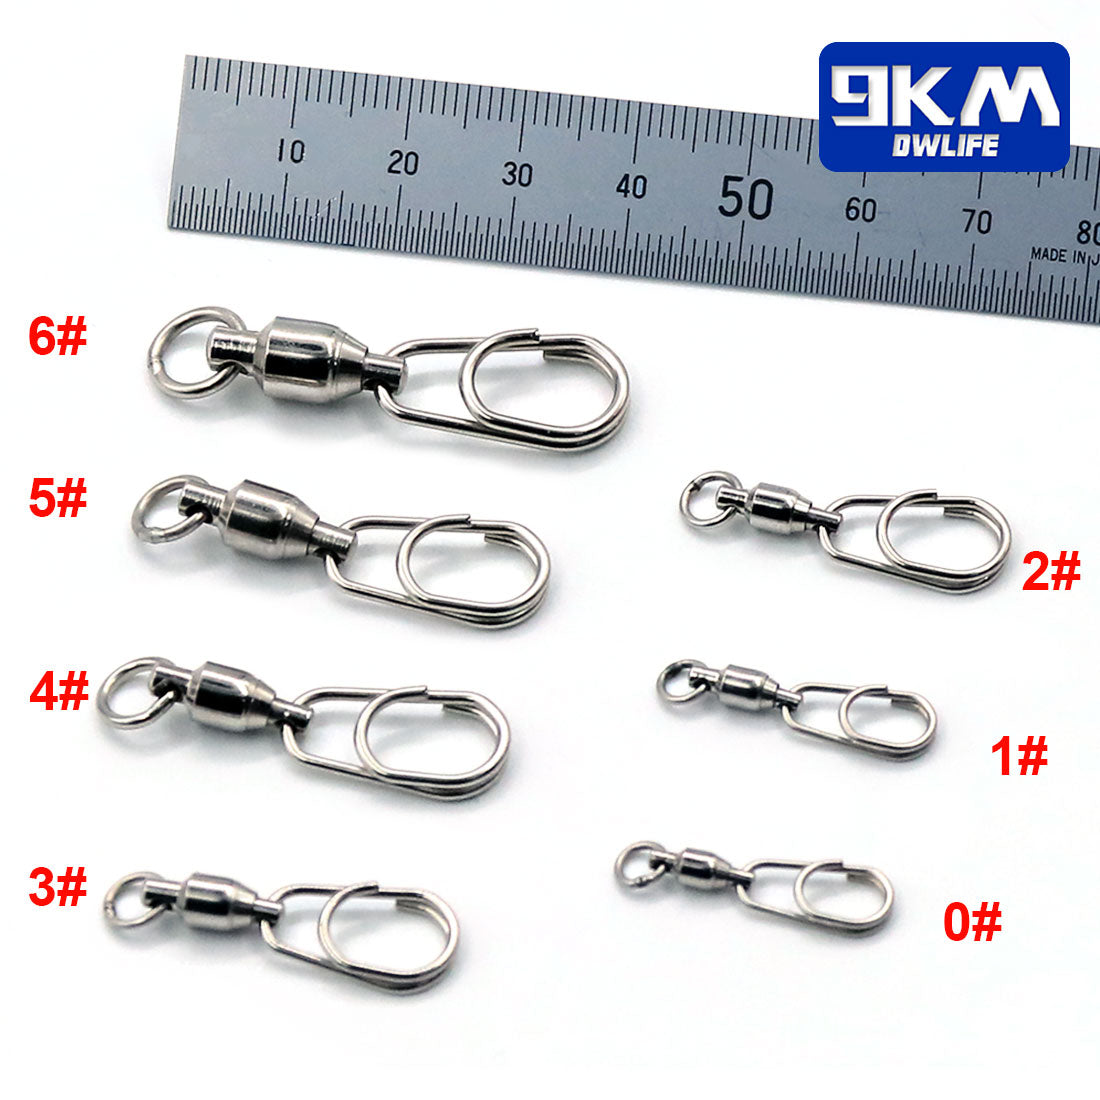 20~100Pcs Fishing Ball Bearing Swivels Duolock Snap Stainless Steel Fishing  Connector Swivels with Crane